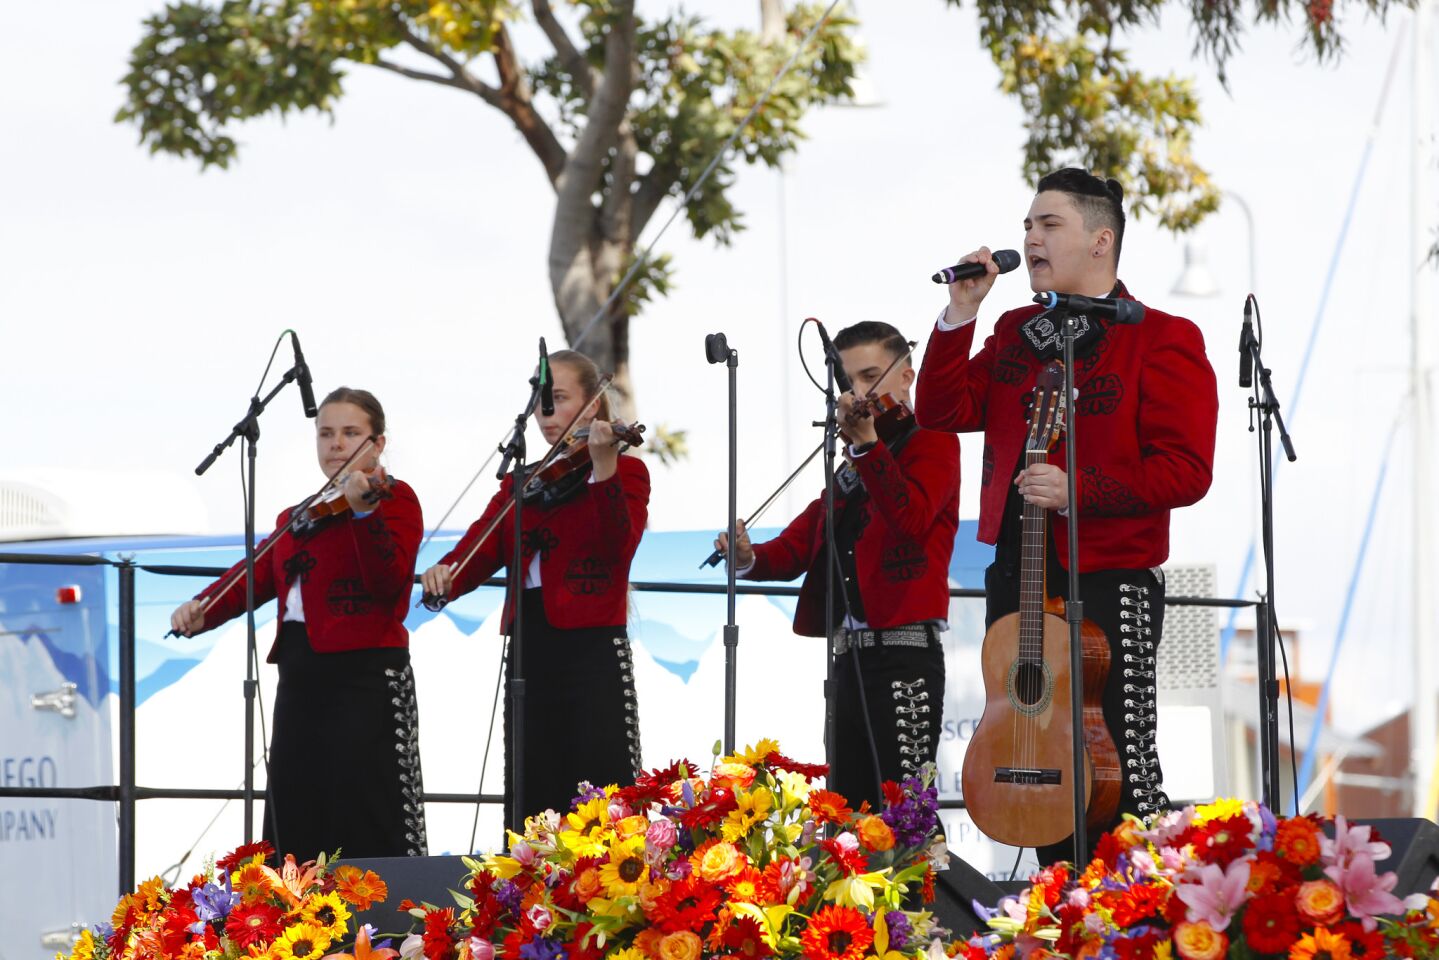 Students from the Mariachi Ambiente group performed during Sunday for the annual International Mariachi Festival in National City.